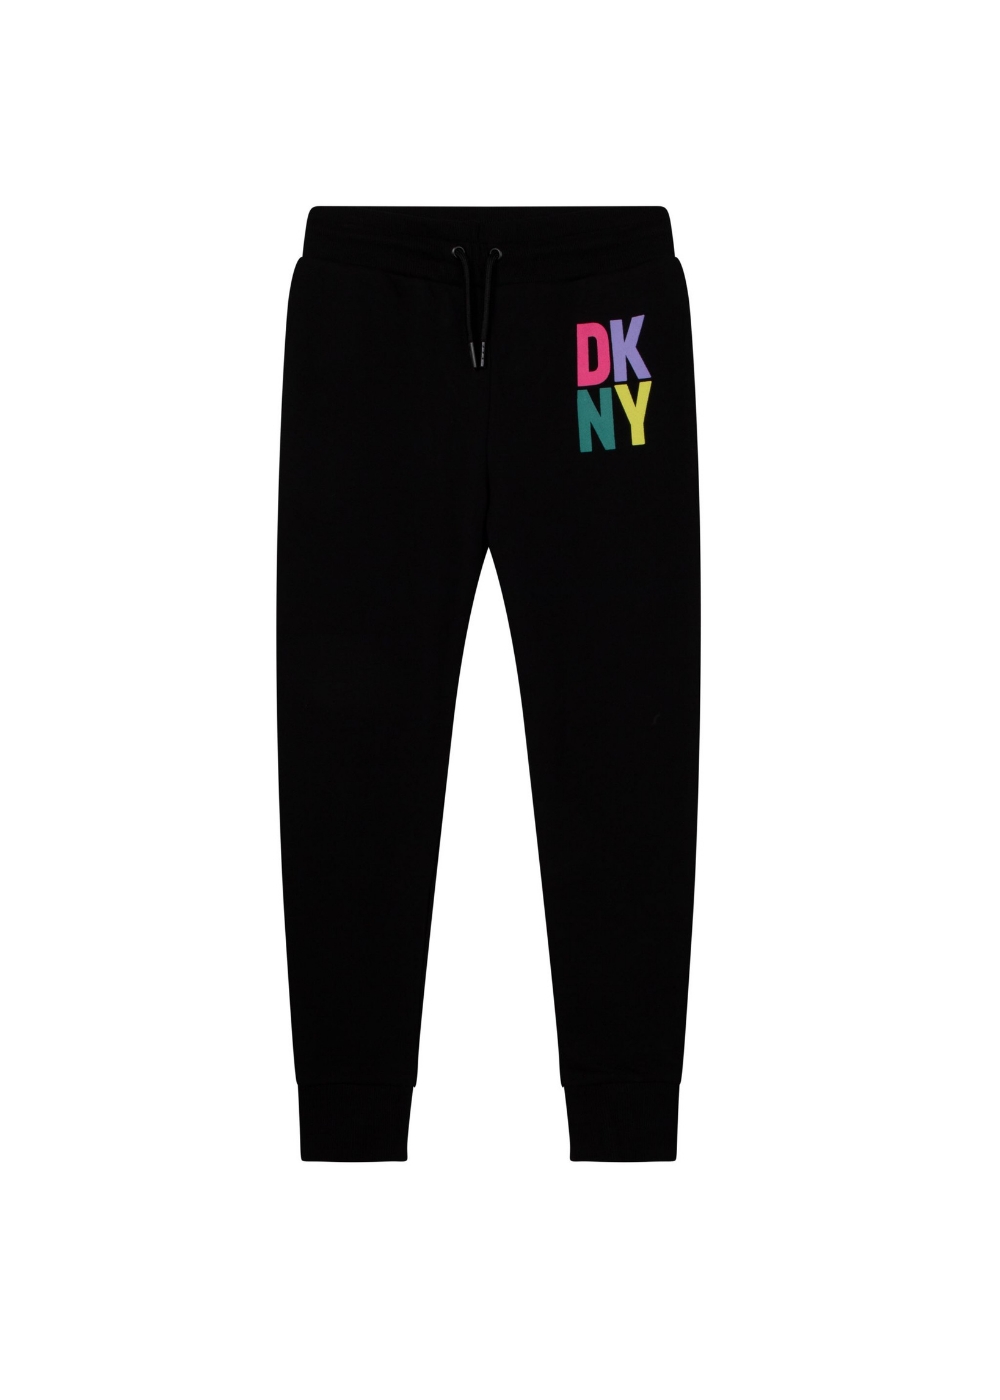 Featured image for “Dkny Jogging”